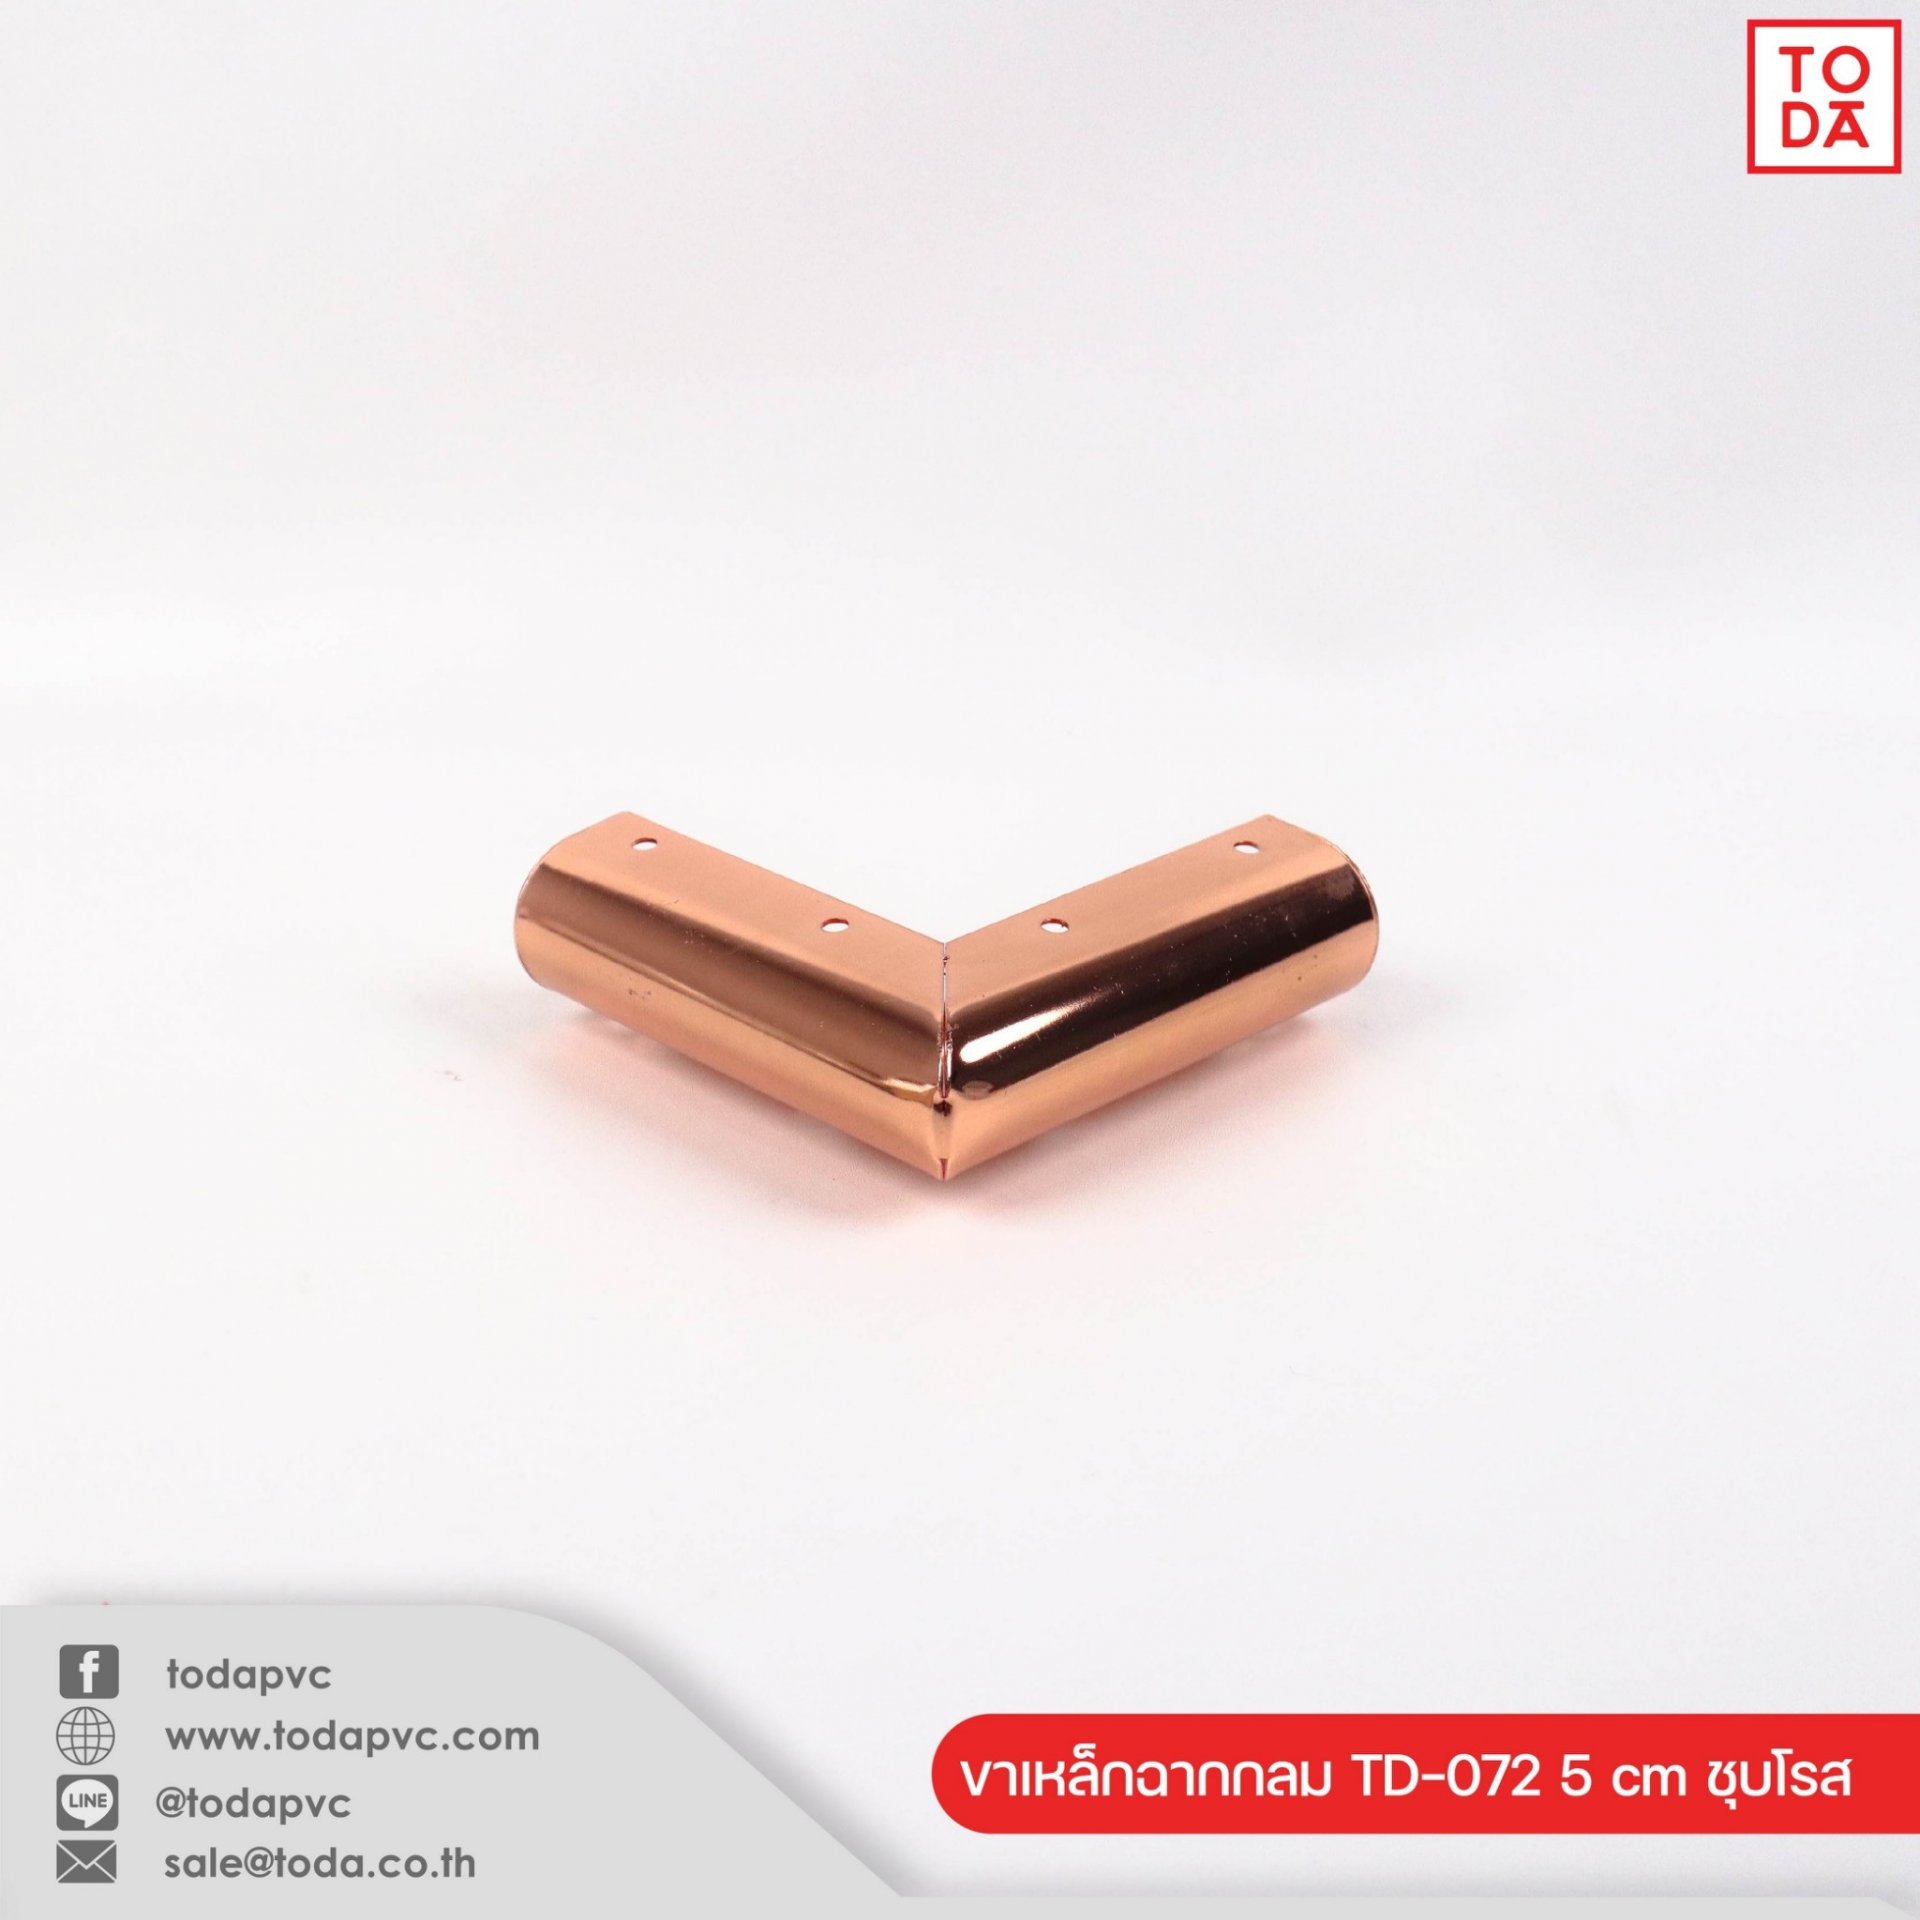 Round angle steel leg TD-072 5 cm rose gold plated